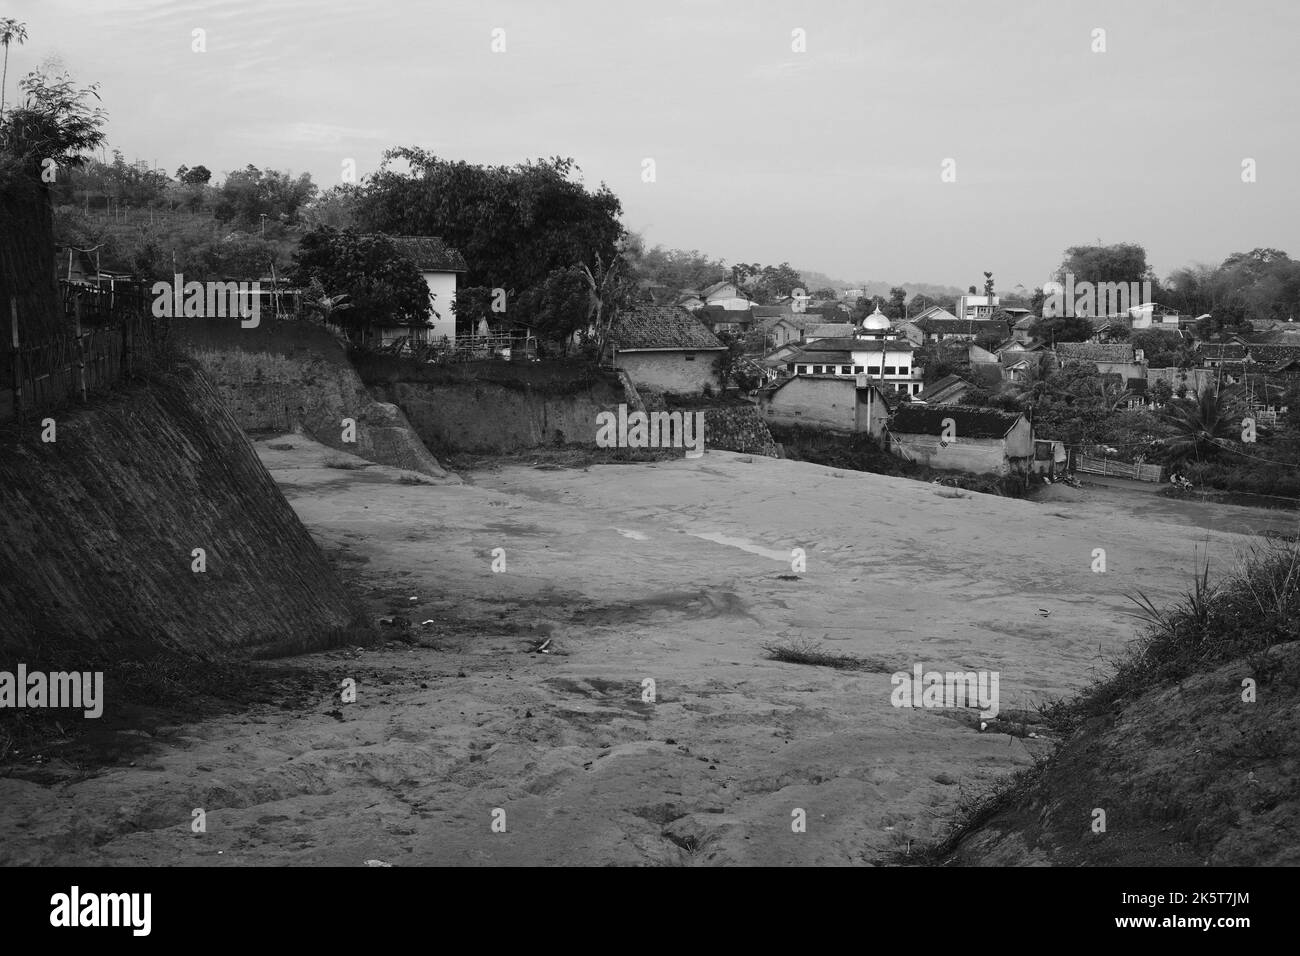 Construction land, Monochrome photo of construction land for new buildings in the Cikancung area - Indonesia Stock Photo